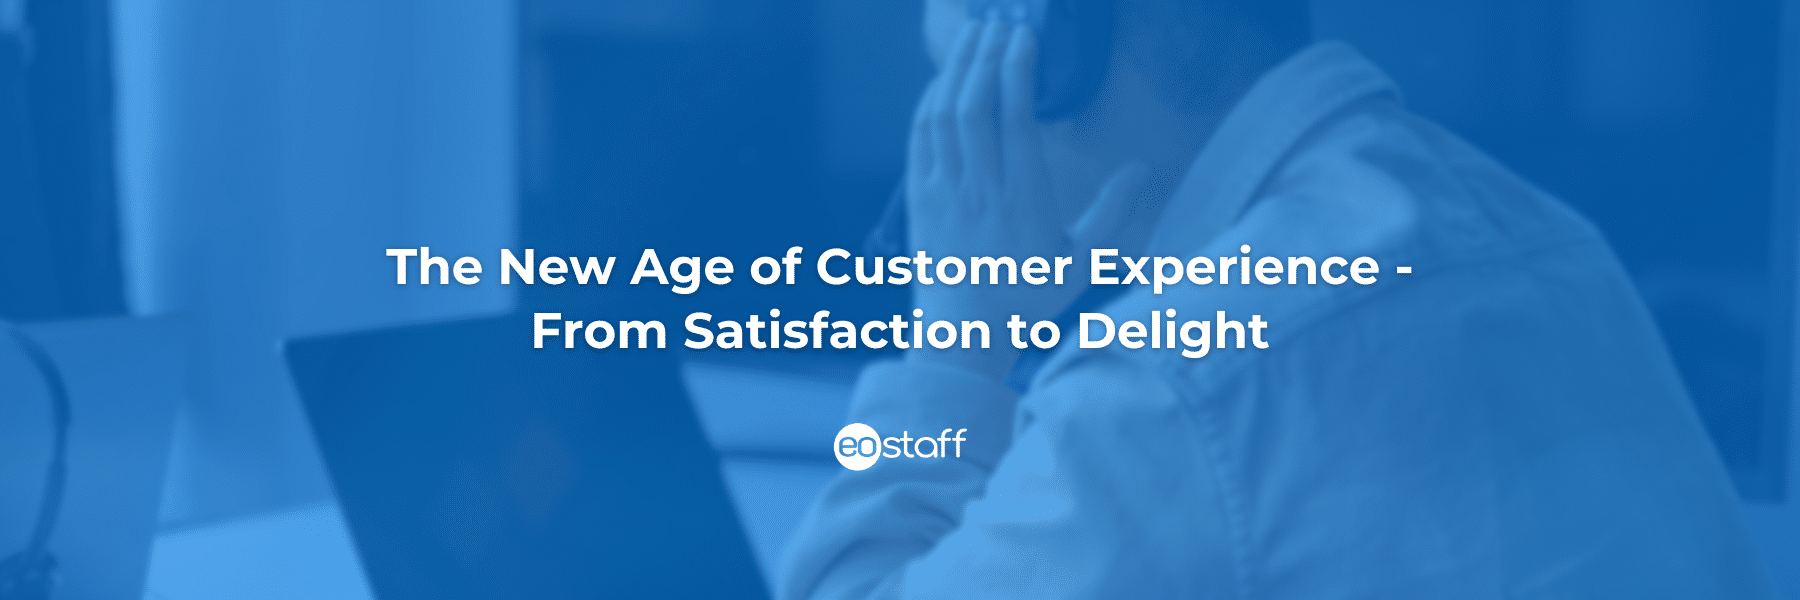 The New Age of Customer Experience - From Satisfaction to Delight